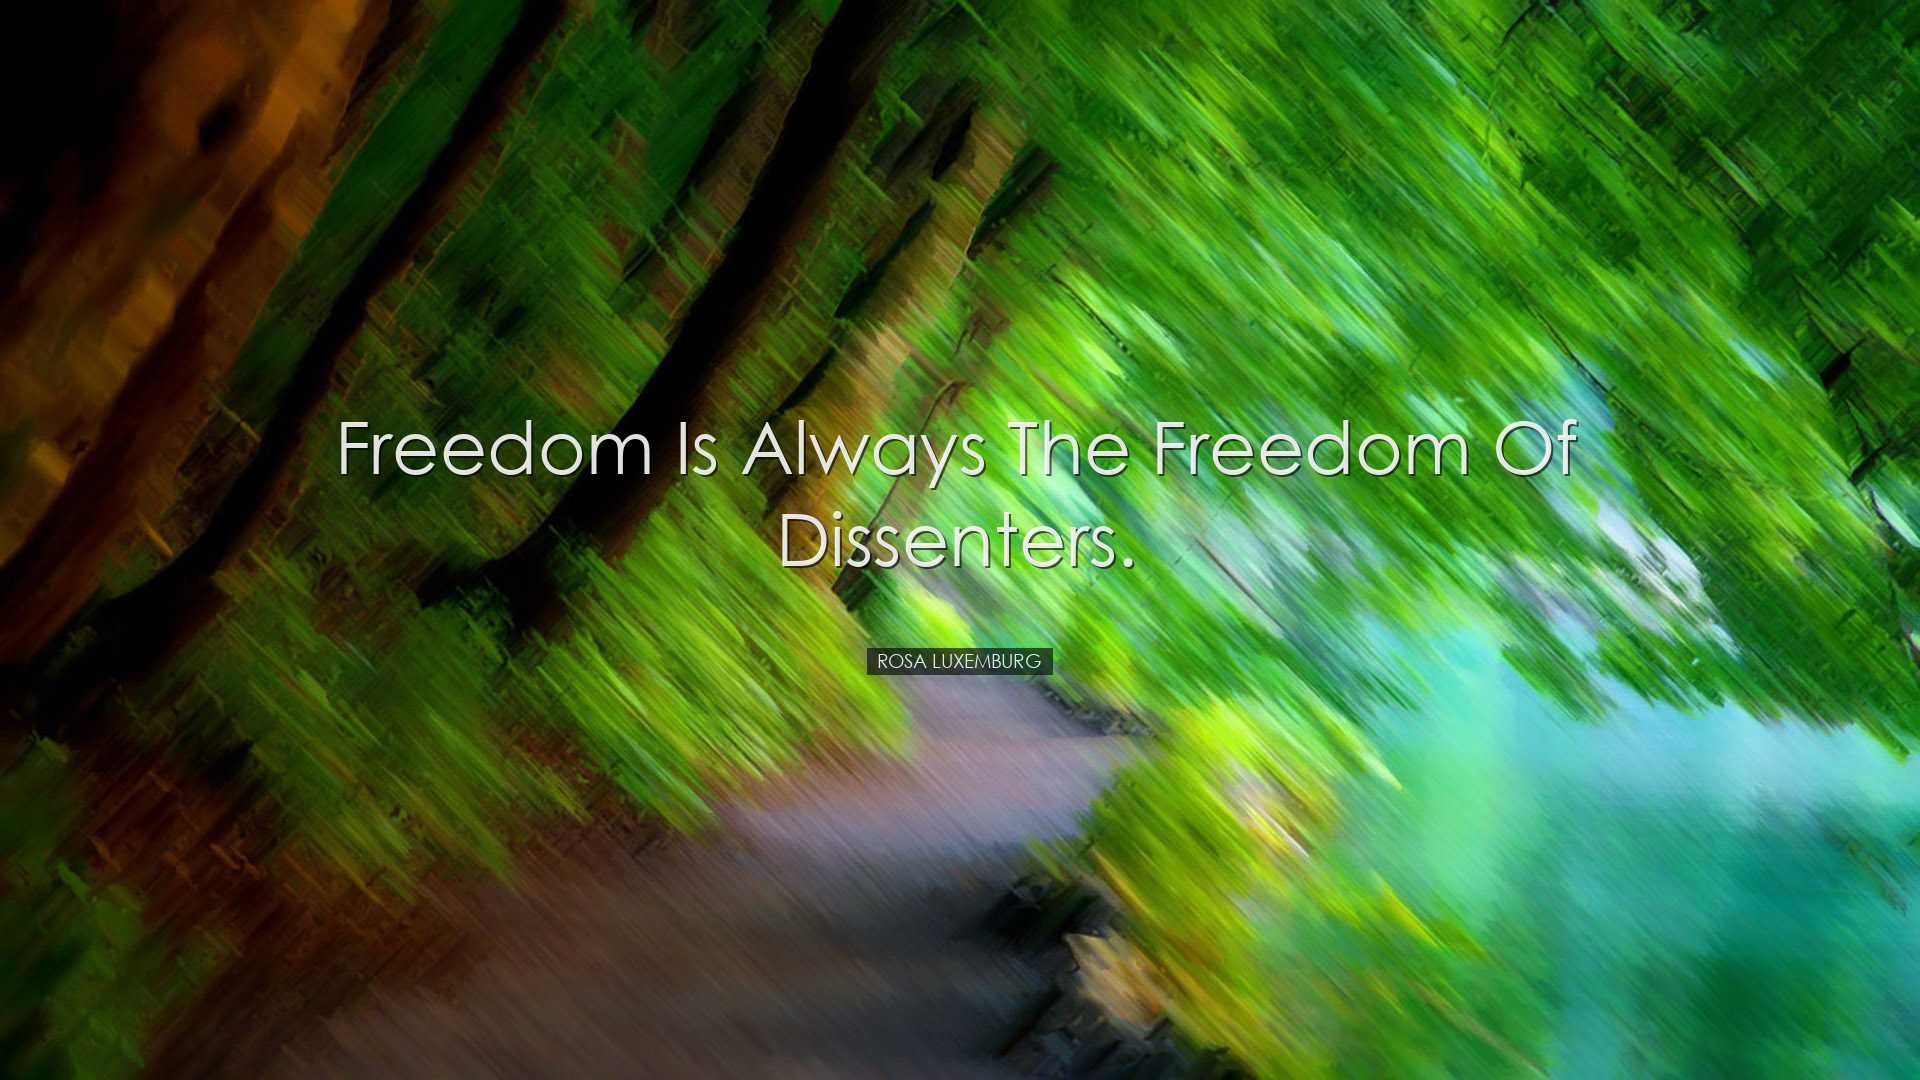 Freedom is always the freedom of dissenters. - Rosa Luxemburg